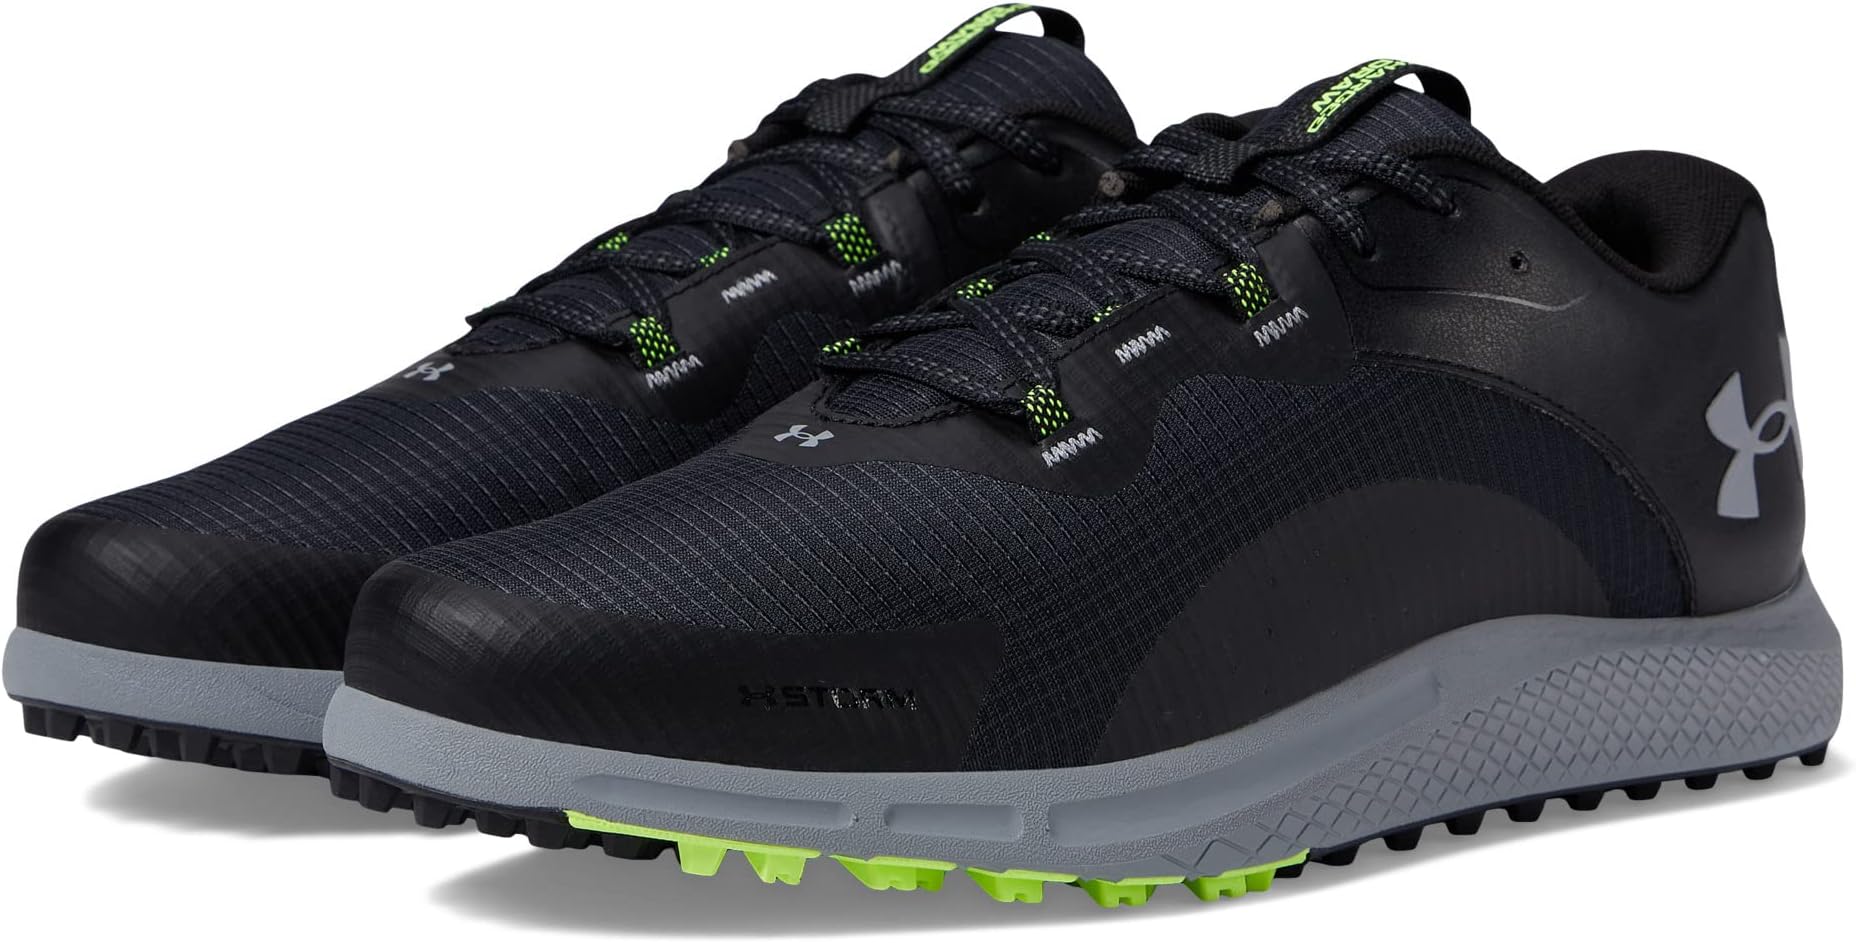 Кроссовки Charged Draw 2 Spikeless Under Armour, цвет Black/Black/Steel